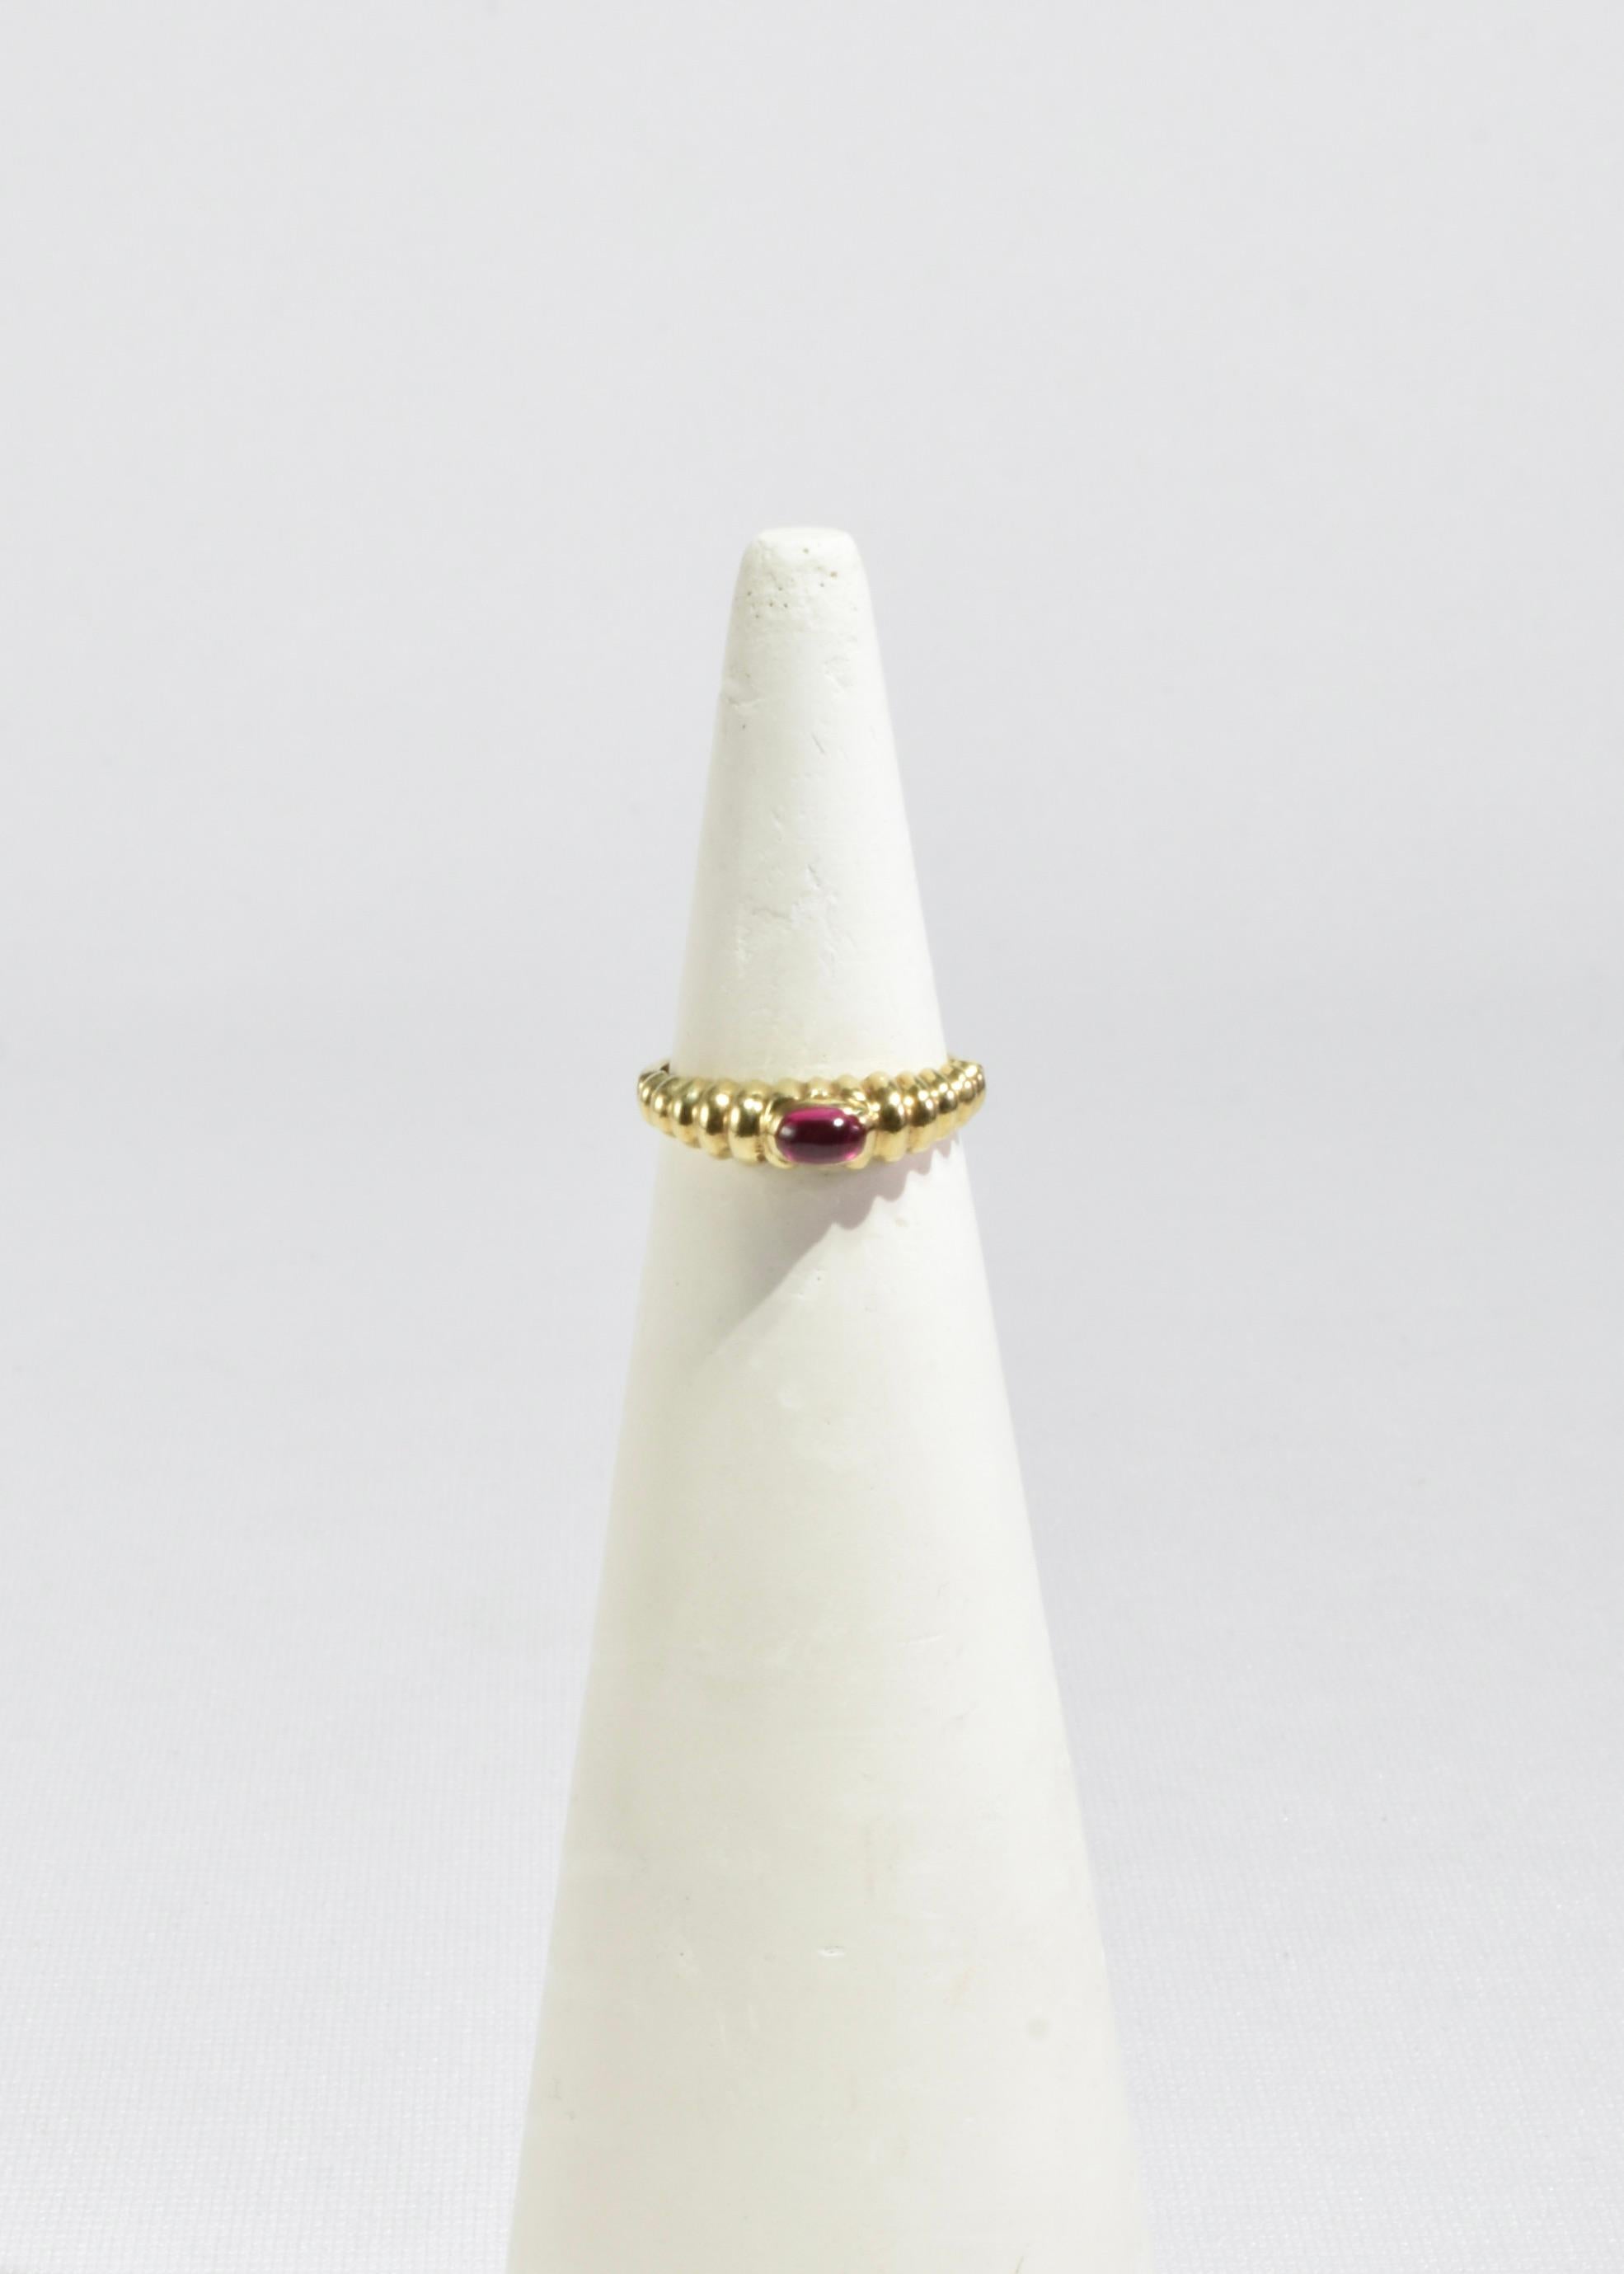 Stunning vintage gold ring with a ruby cabochon and ribbed detail. Stamped 14k.

Material: 14k gold, ruby.